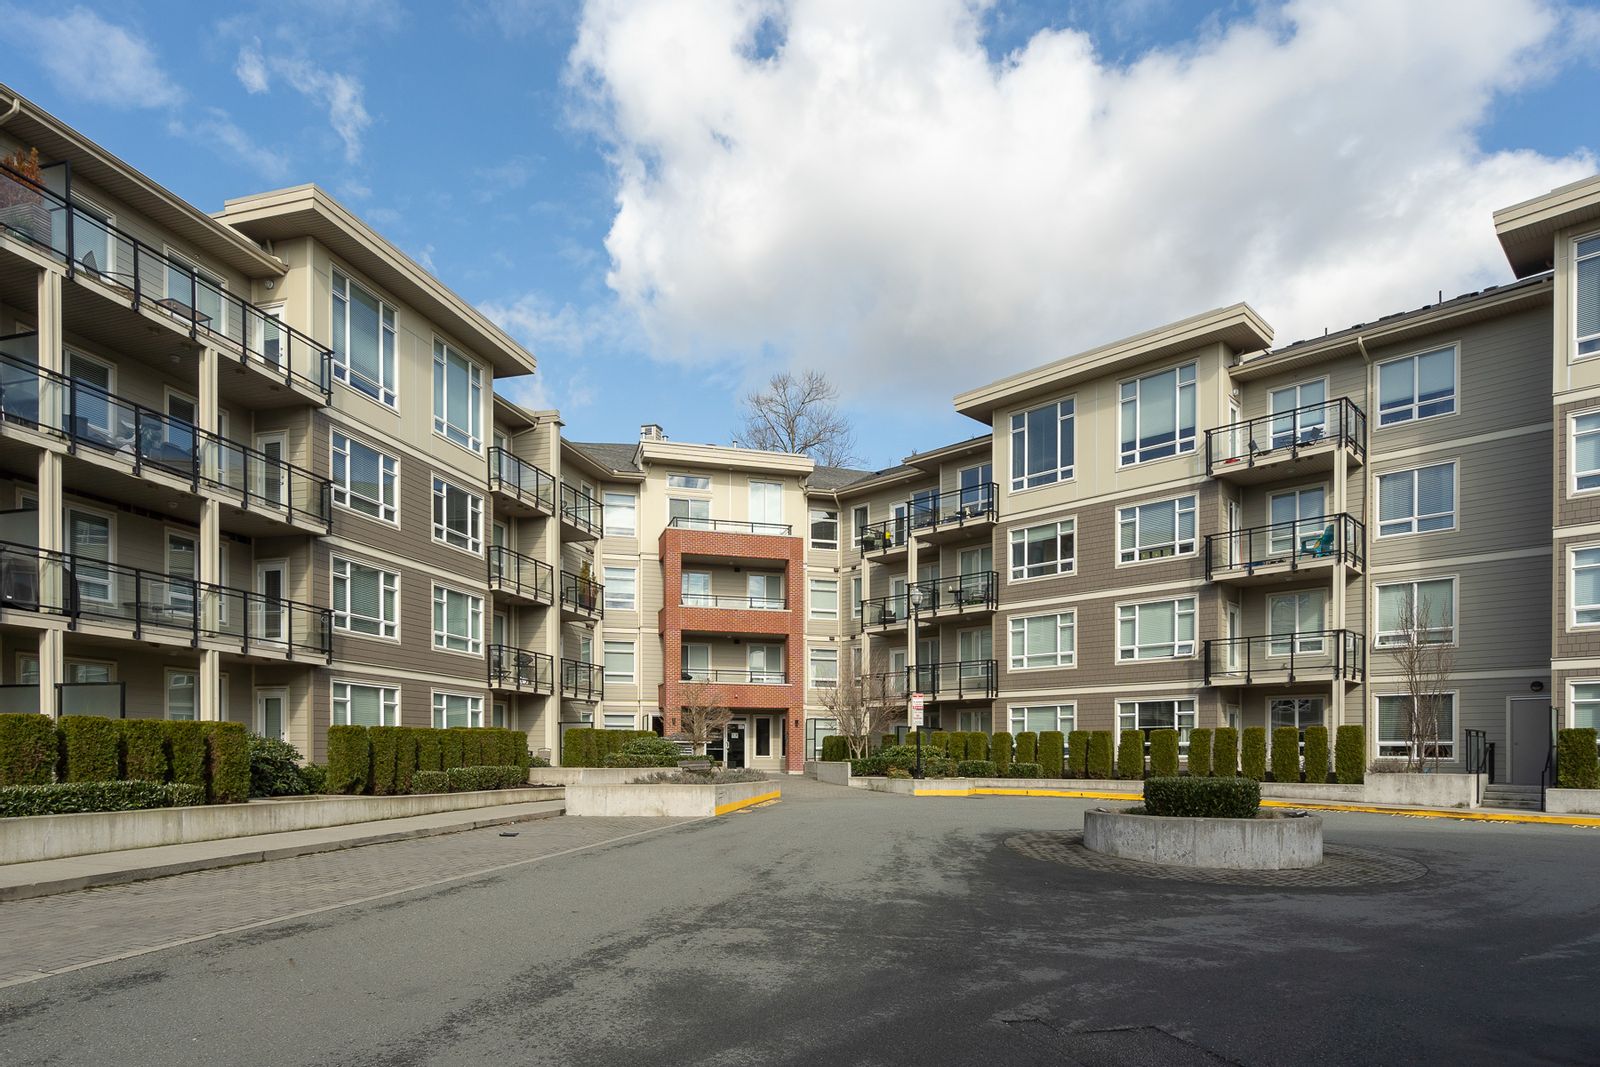 Just Sold: C322 20211 66th Ave., Langley, Willoughby Heights